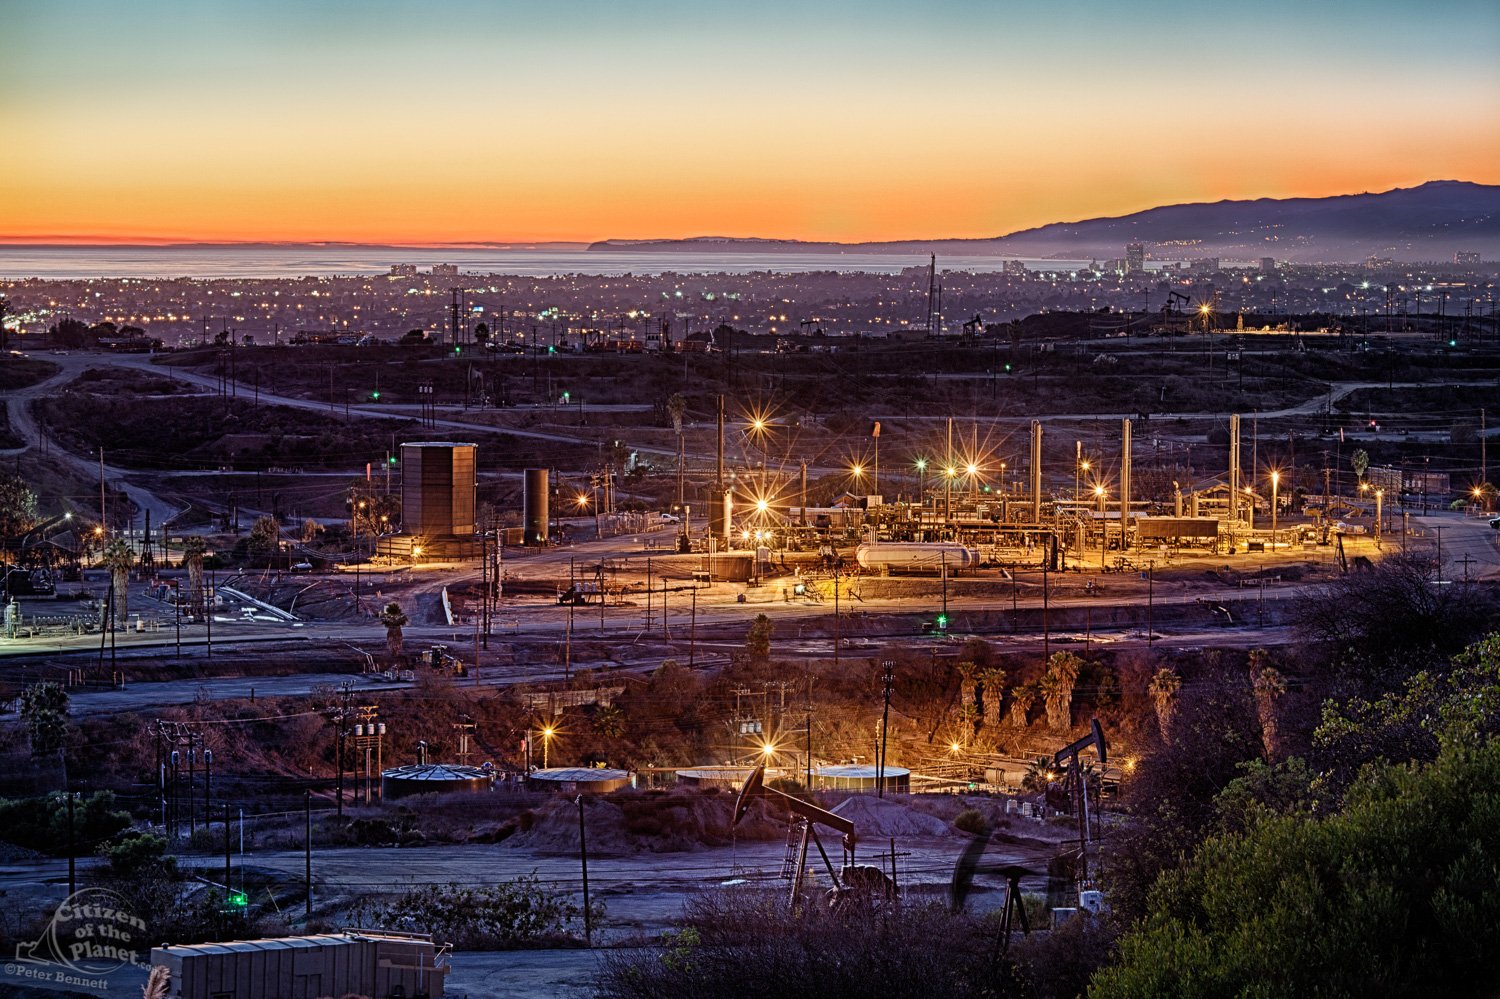  Inglewood Oil Field, one of the largest urban oil fields in the country, with city of Santa Monica and Malibu coastline in the background. 